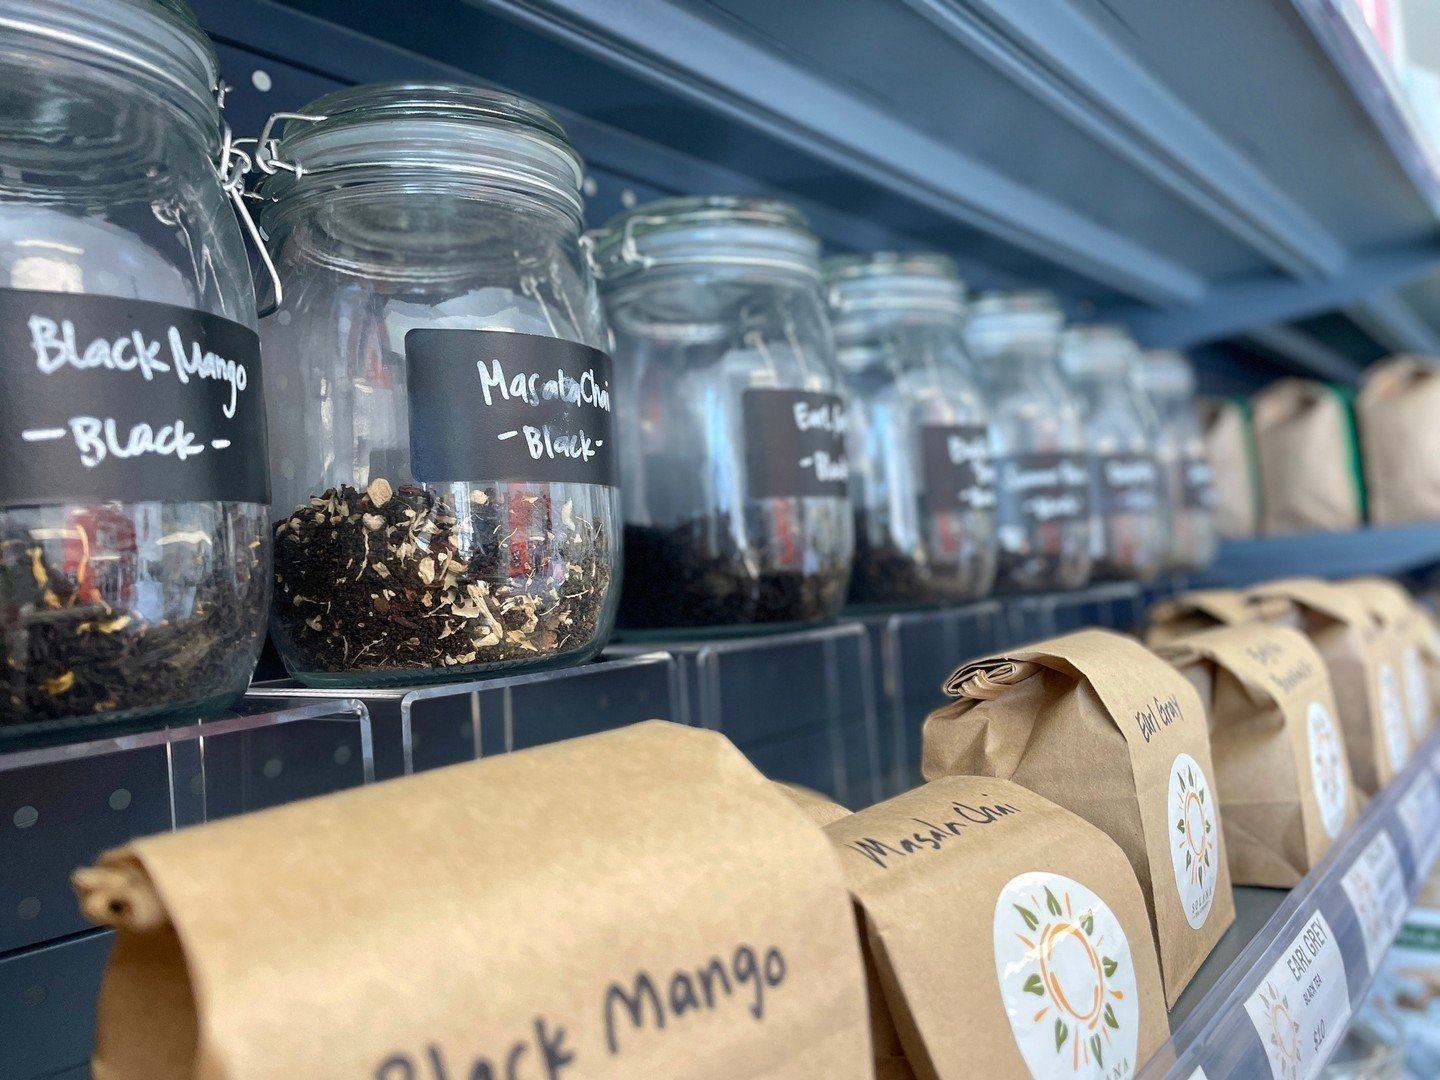 in addition to bags o' beans and all your home brewing needs, we also have loose leaf tea at the Shop on Jefferson 🤯 ⁠
learn more about the Shop at the link in bio 🛹